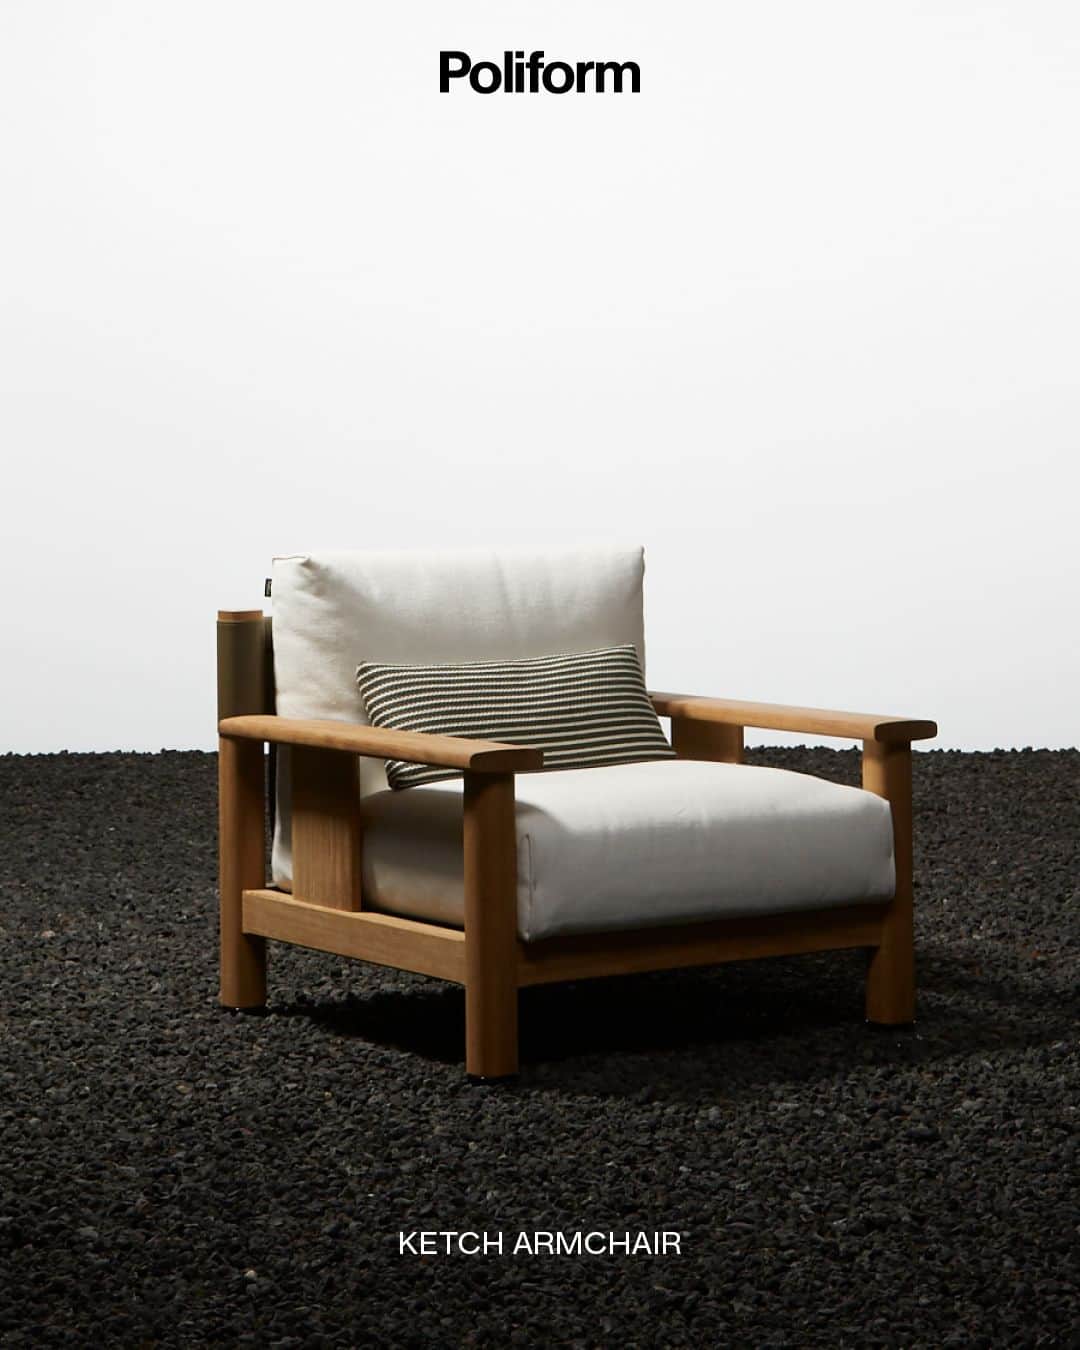 Poliform|Varennaのインスタグラム：「A collection that is all about comfort, functionality and natural elegance: different pieces defined by refined materials and details, great on their own and even more striking when paired together. Discover the outdoor collection designed by @jm_massaud  on poliform.com.  #poliform #design #madeinitaly #SaloneDelMobile #SaloneDelMobile2023 #MilanDesignWeek #MDW23 #PoliformOutdoor  #OutdoorCollection #PoliformOutdoorCollection #JeanMarieMassaud #Ketch #PoliformKetch #PoliformKetchCollection #KetchSofa #KetchArmchair #KetchCanopy #PoliformKetchSofa #PoliformKetchArmchair #PoliformCrew #PoliformCrewCoffeeTables #CrewCoffeeTables #PoliformLeClubArmchairs #PoliformLeClub #PoliformCrewVases #CrewVases」